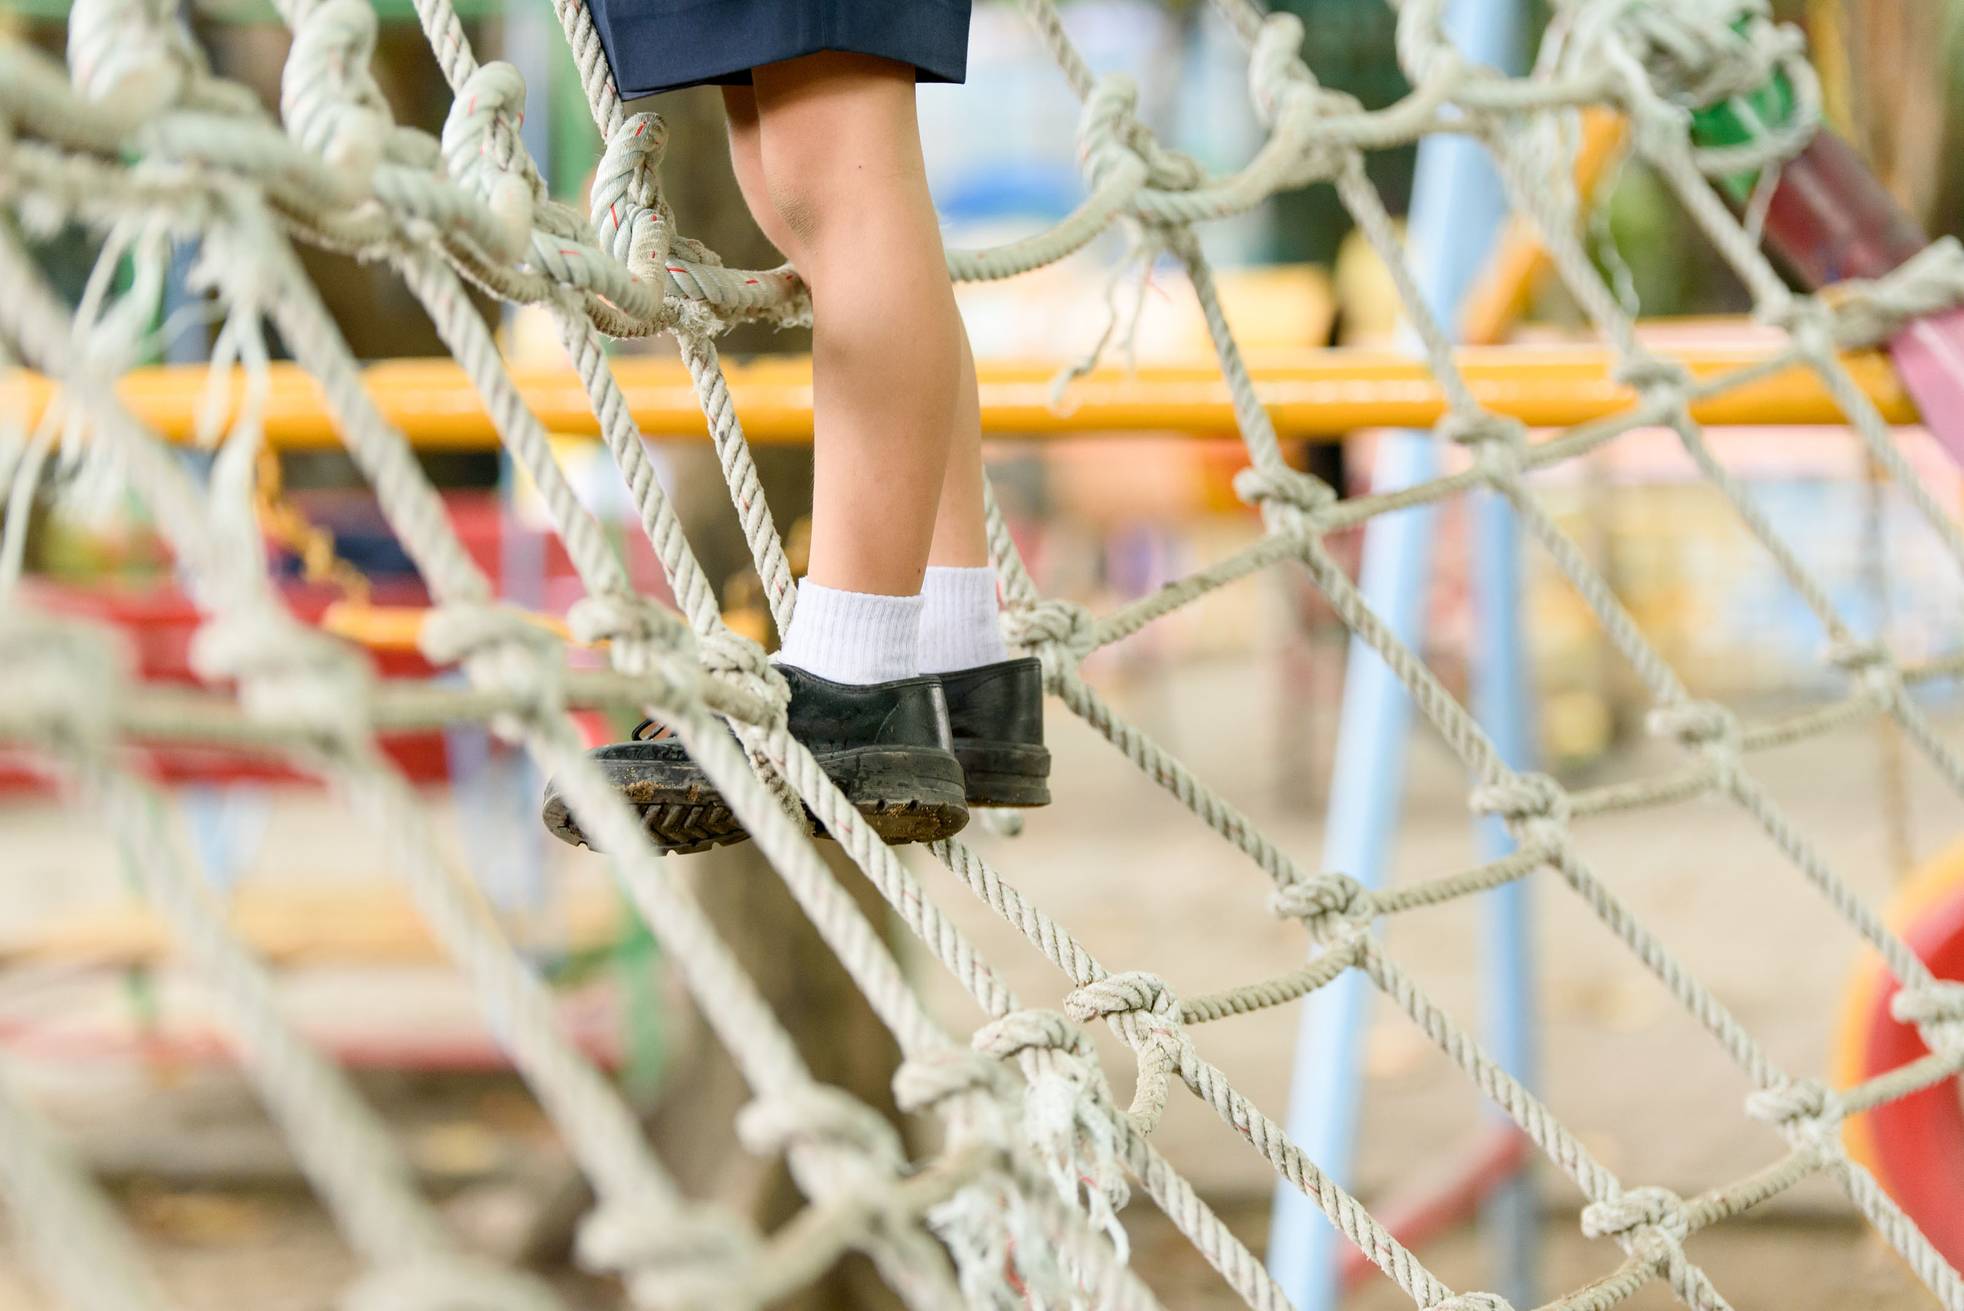 Rope net climbing frame in a playground